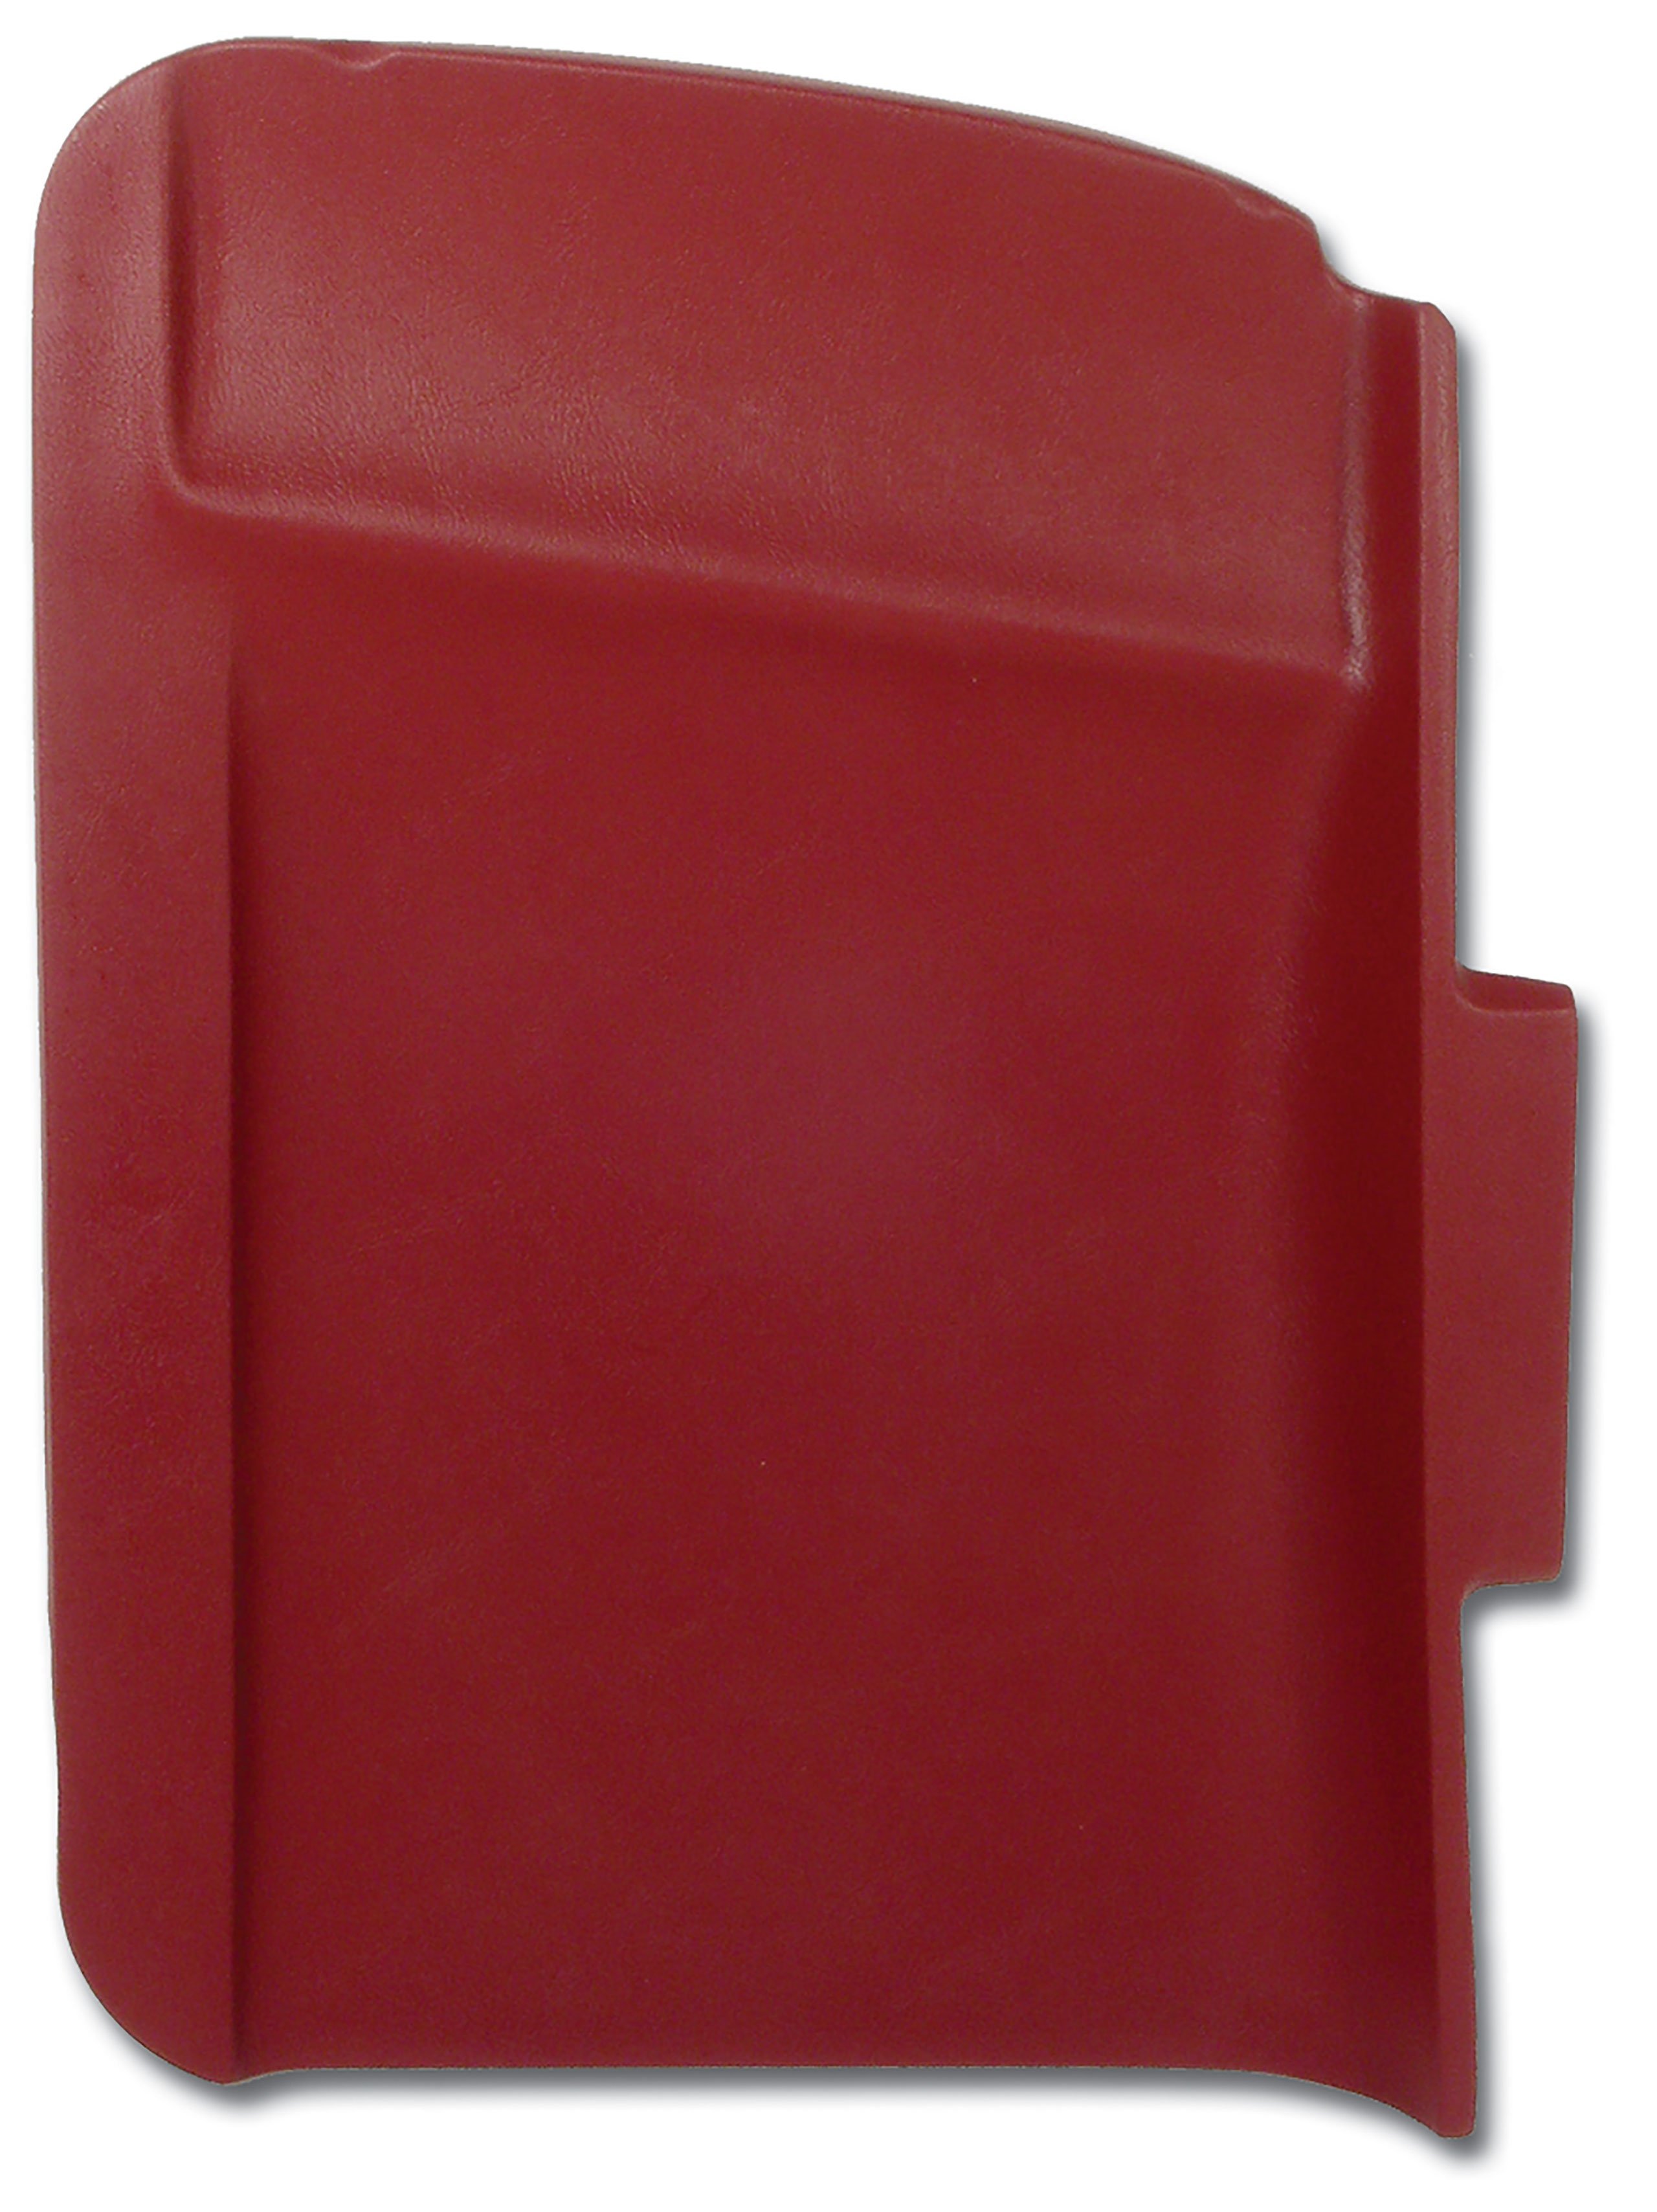 T-Top Pad- Oxblood LH For 1973 Corvette